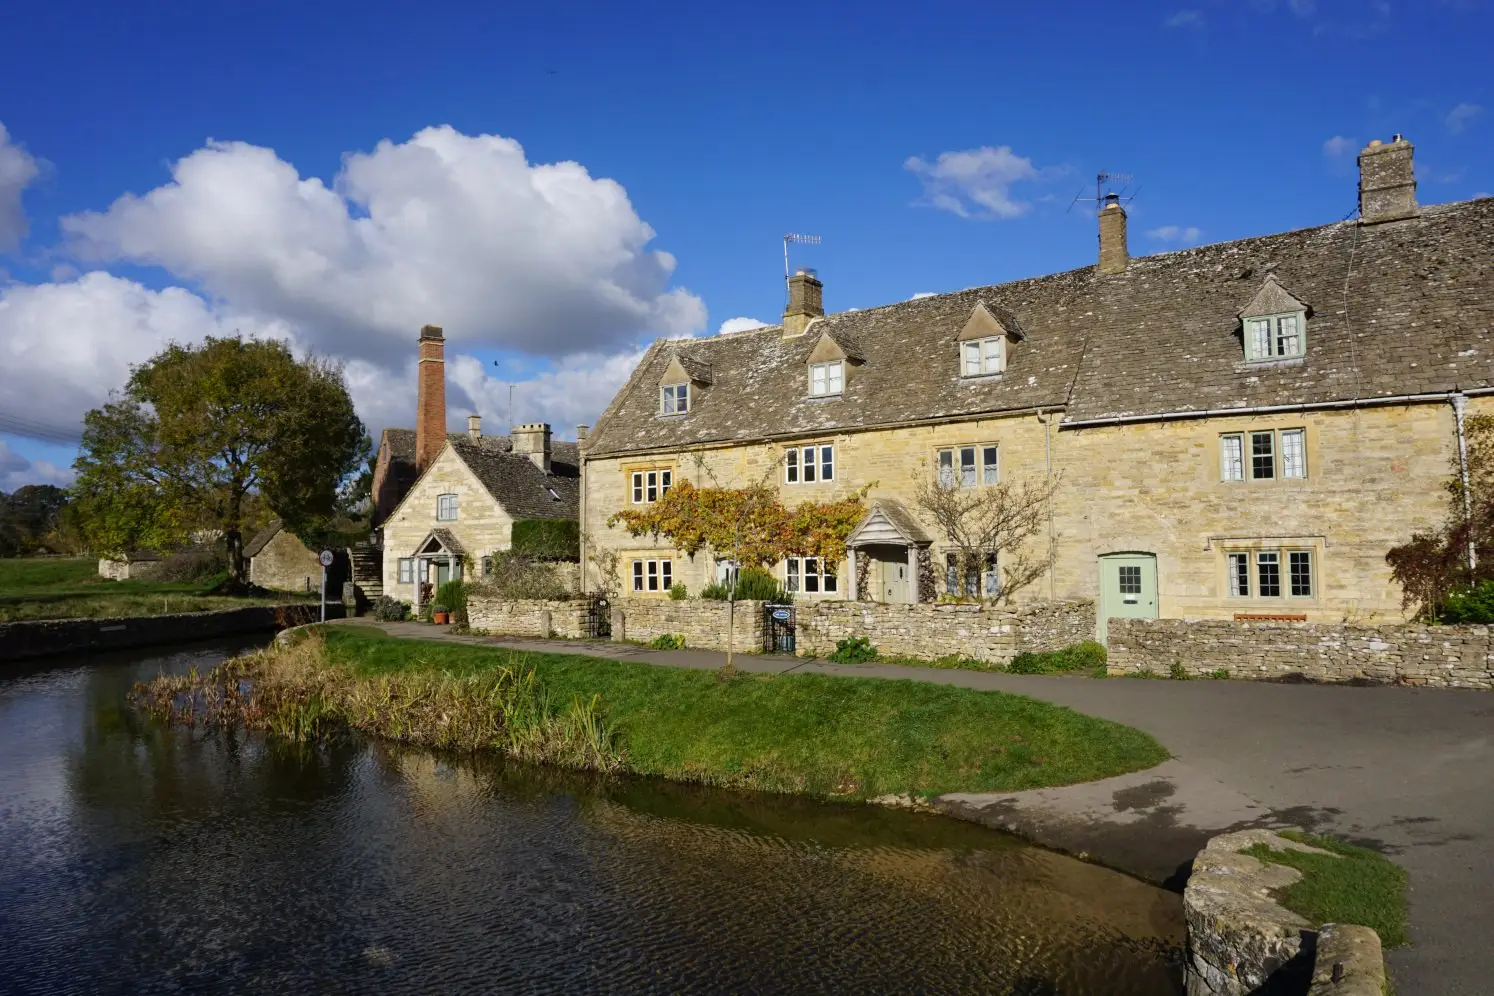 Picturesque cottages in the Cotswold village of Lower Slaughter, a stop on the roadtrip to Bath, Bristol, the Cotswolds and beyond